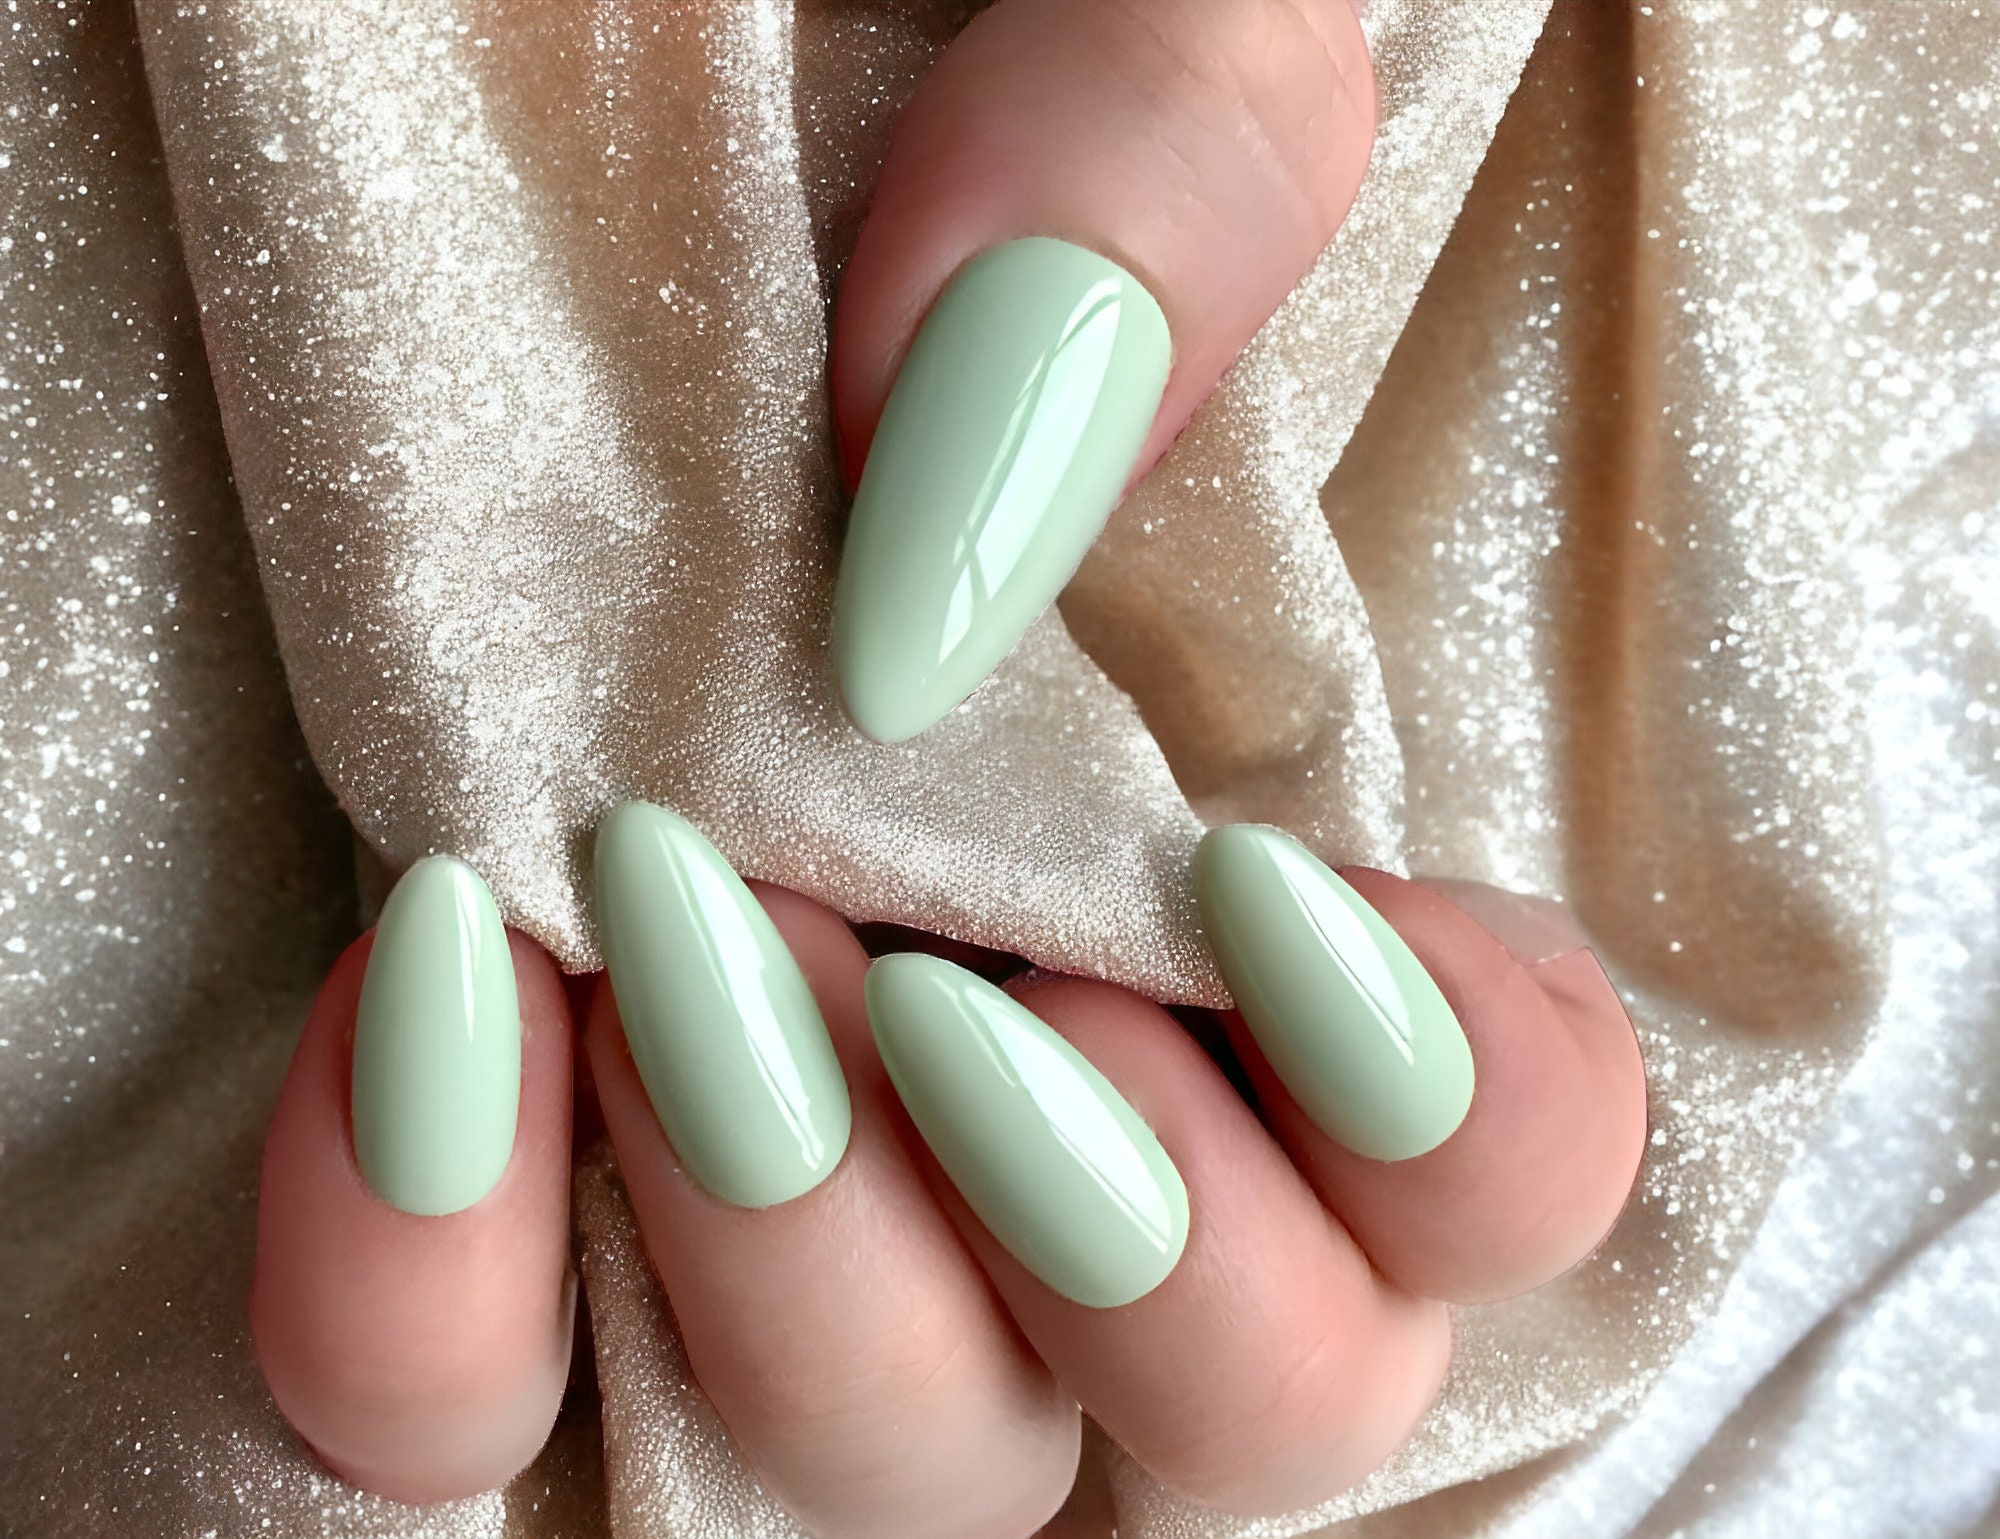 OPI El Salvador - Catch a green light and win it all with this light pastel  green nail polish! 💚💅 Shade: #ThePassIsAlwaysGreener | Facebook